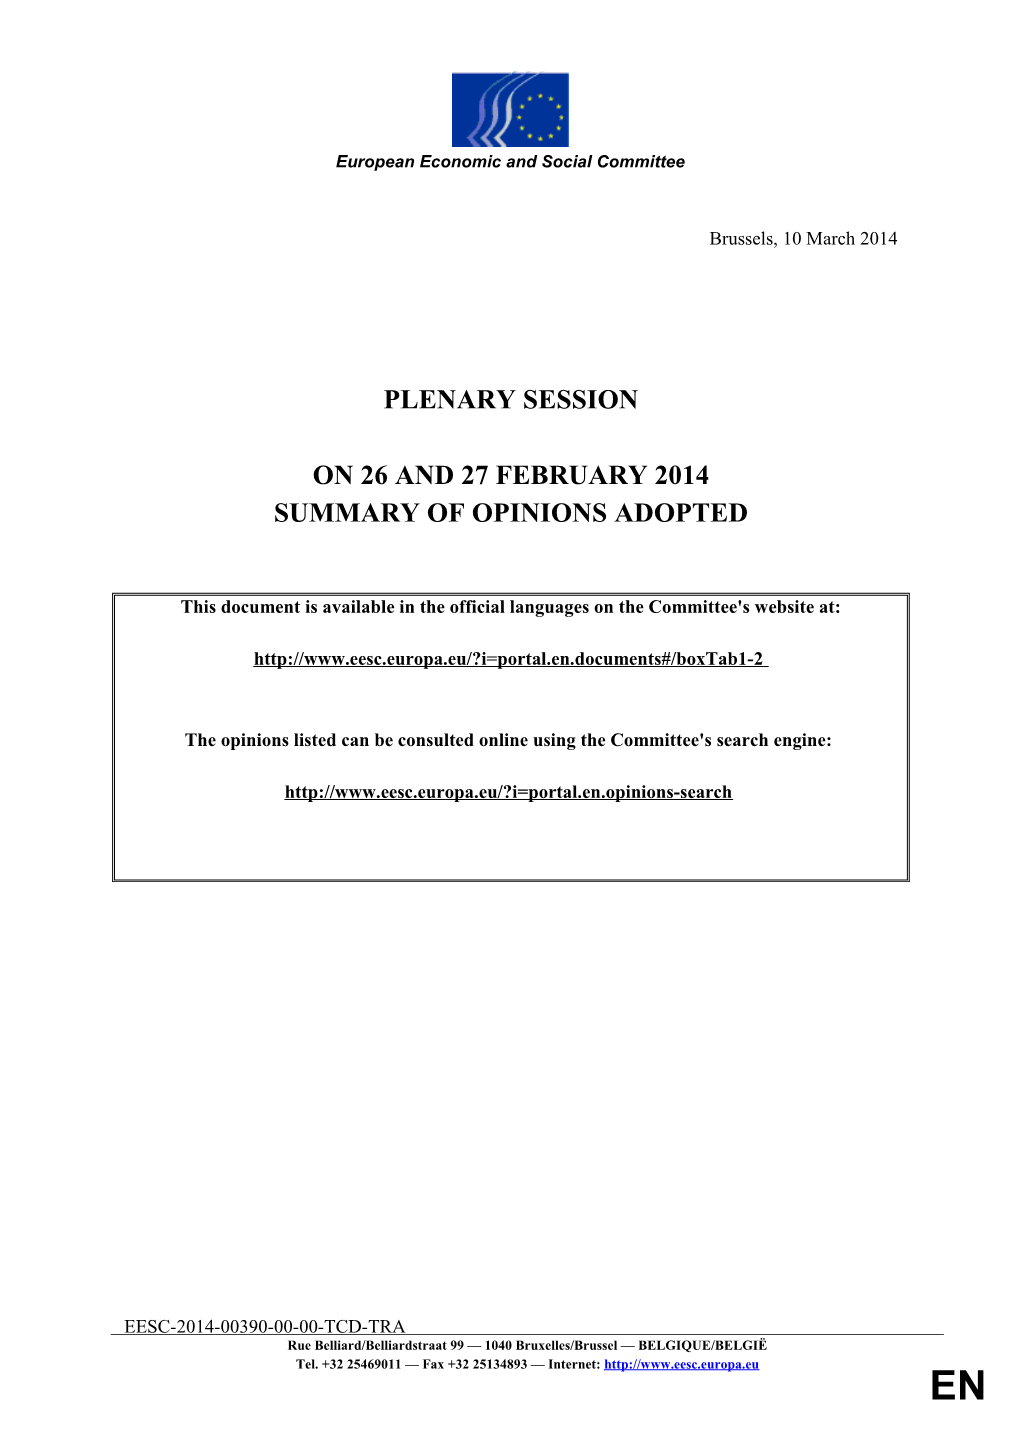 Summary of Opinions Adopted - Plenary Session 26/27-2-2014